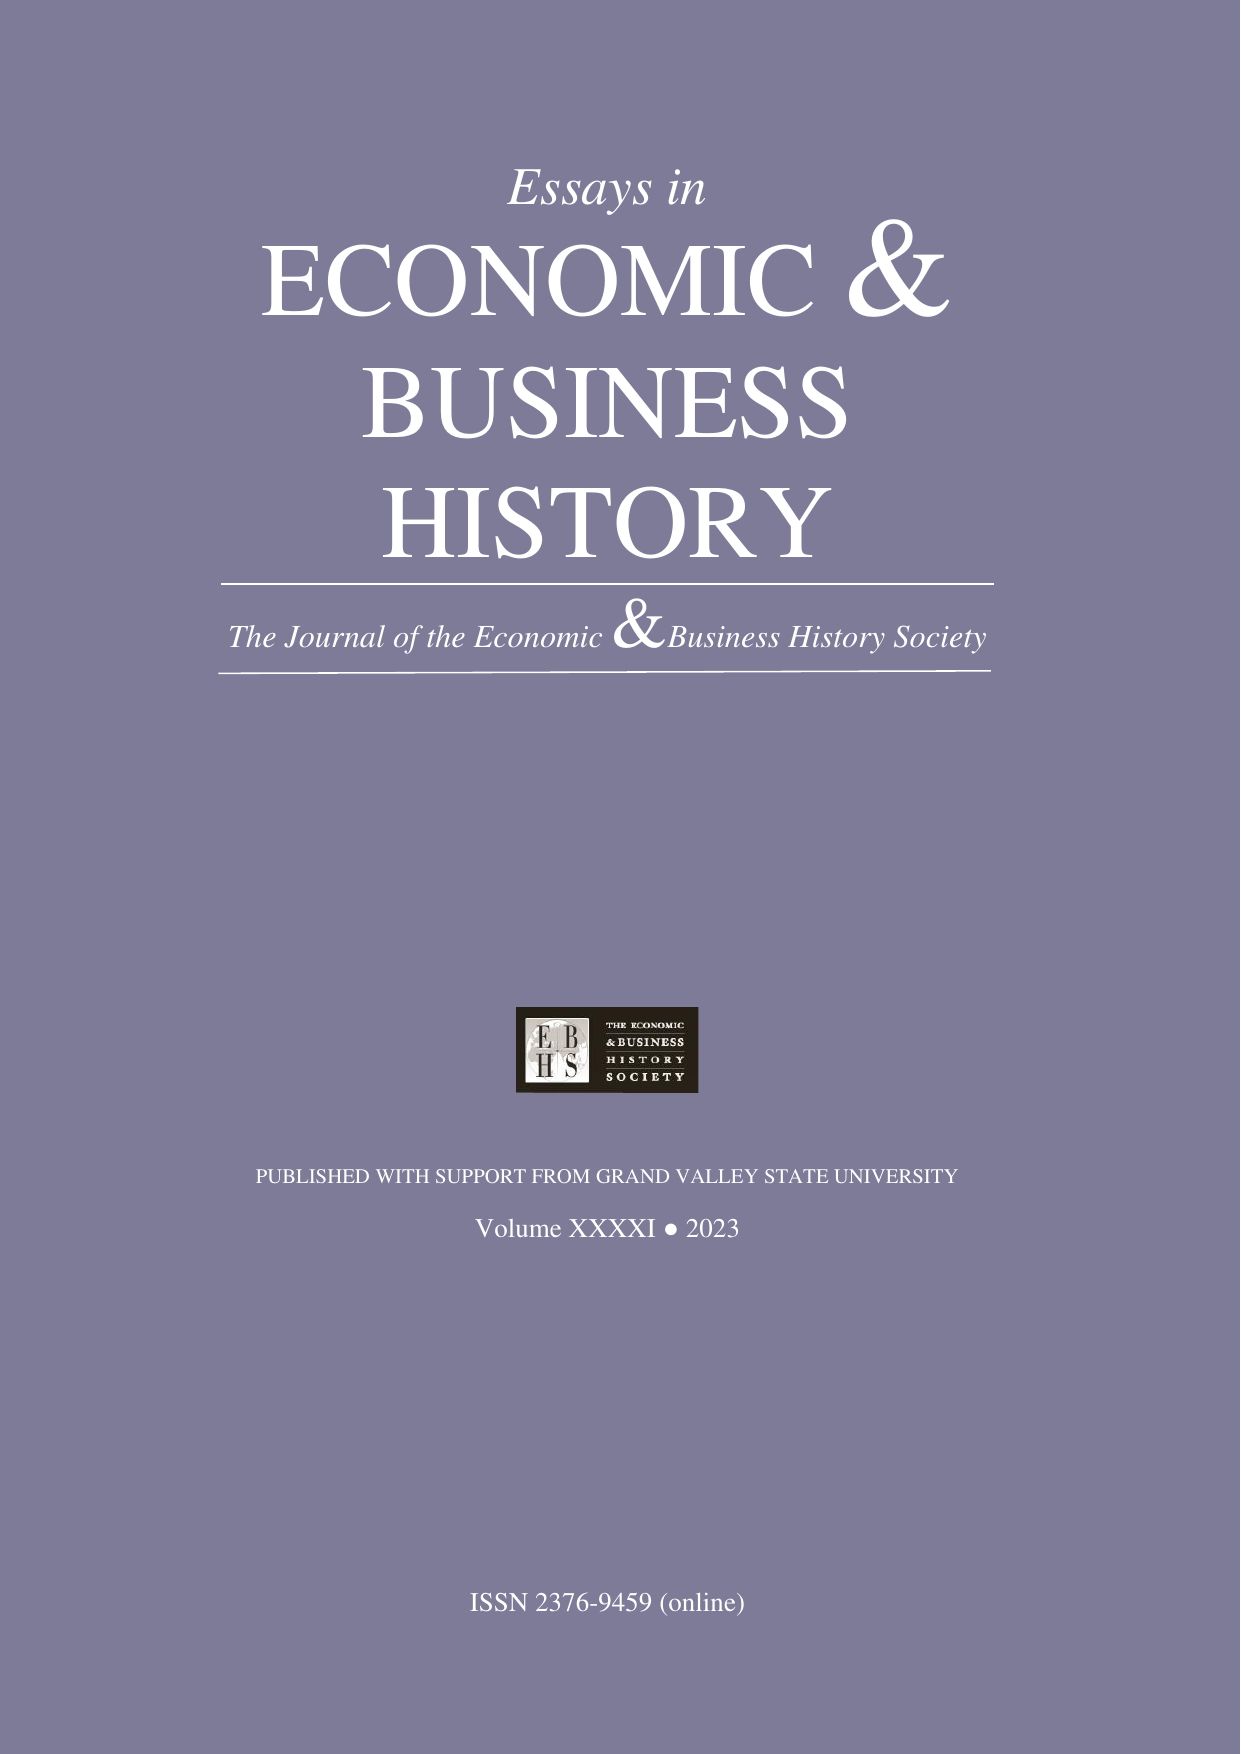 					View Vol. 41 No. 1 (2023): Essays in Economic & Business History
				